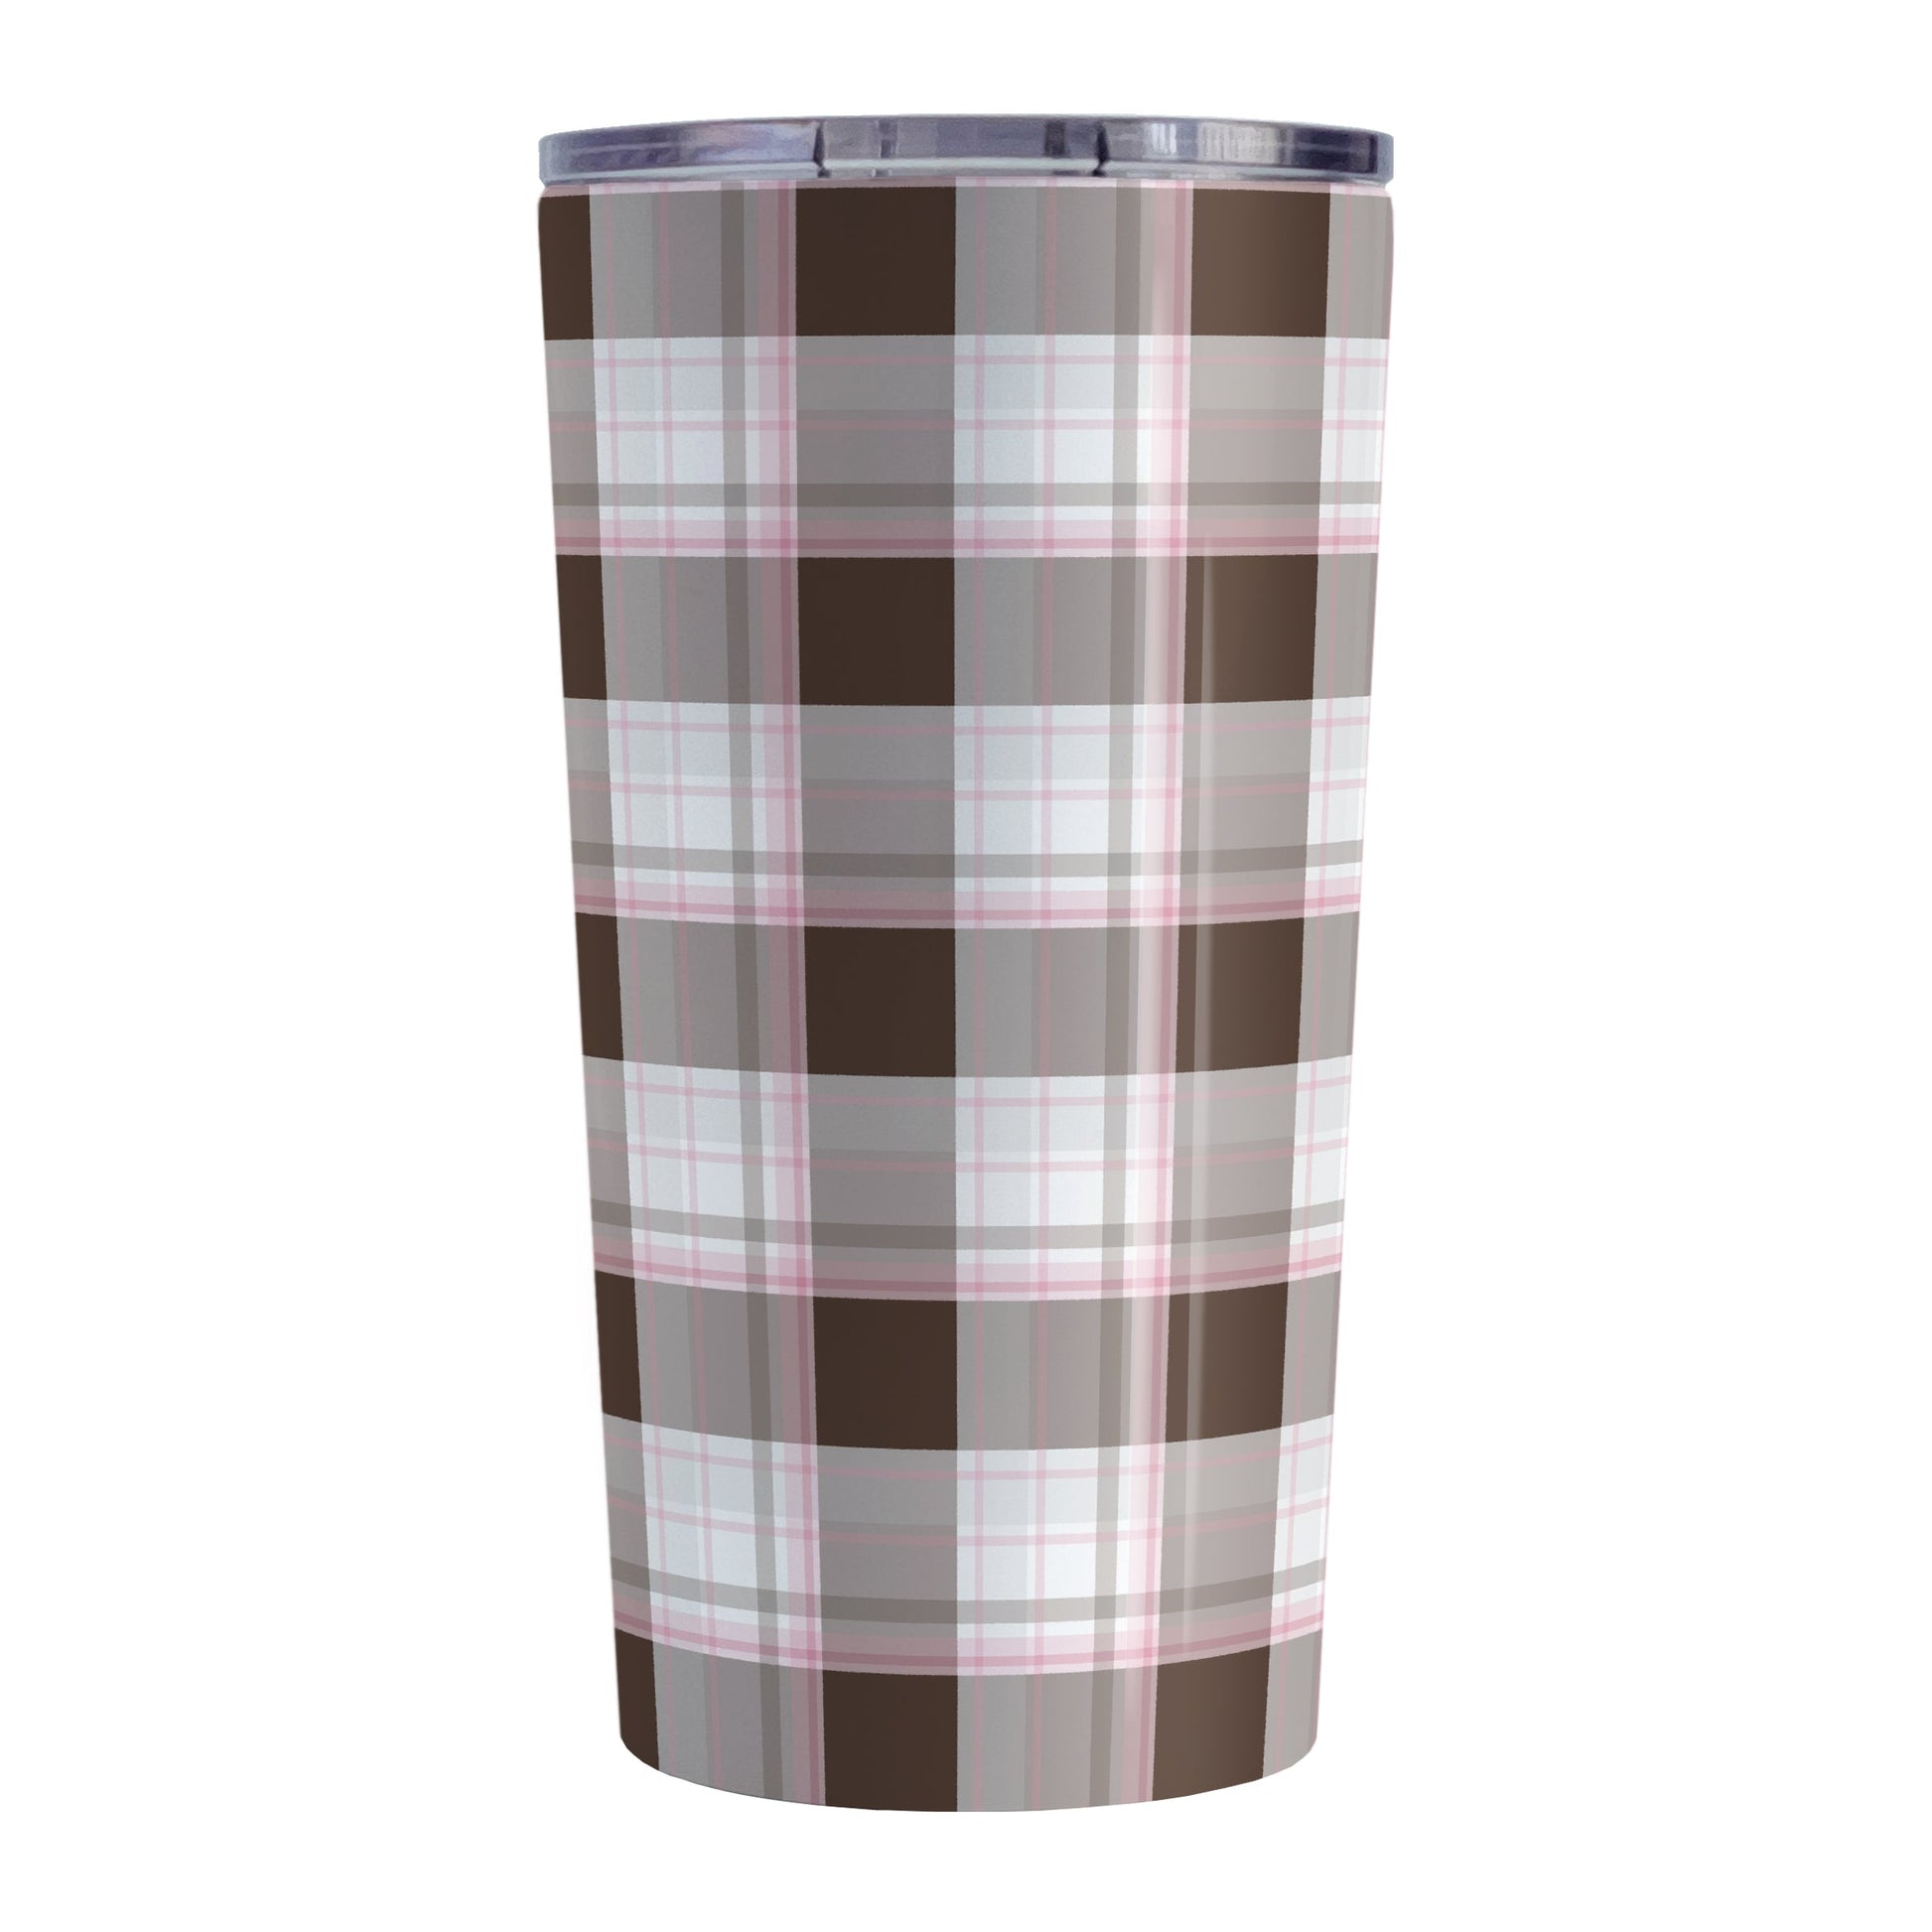 Brown Pink Plaid Tumbler Cup (20oz) at Amy's Coffee Mugs. A stainless steel insulated tumbler cup designed with a brown plaid pattern with pink accents that wraps around the cup. 